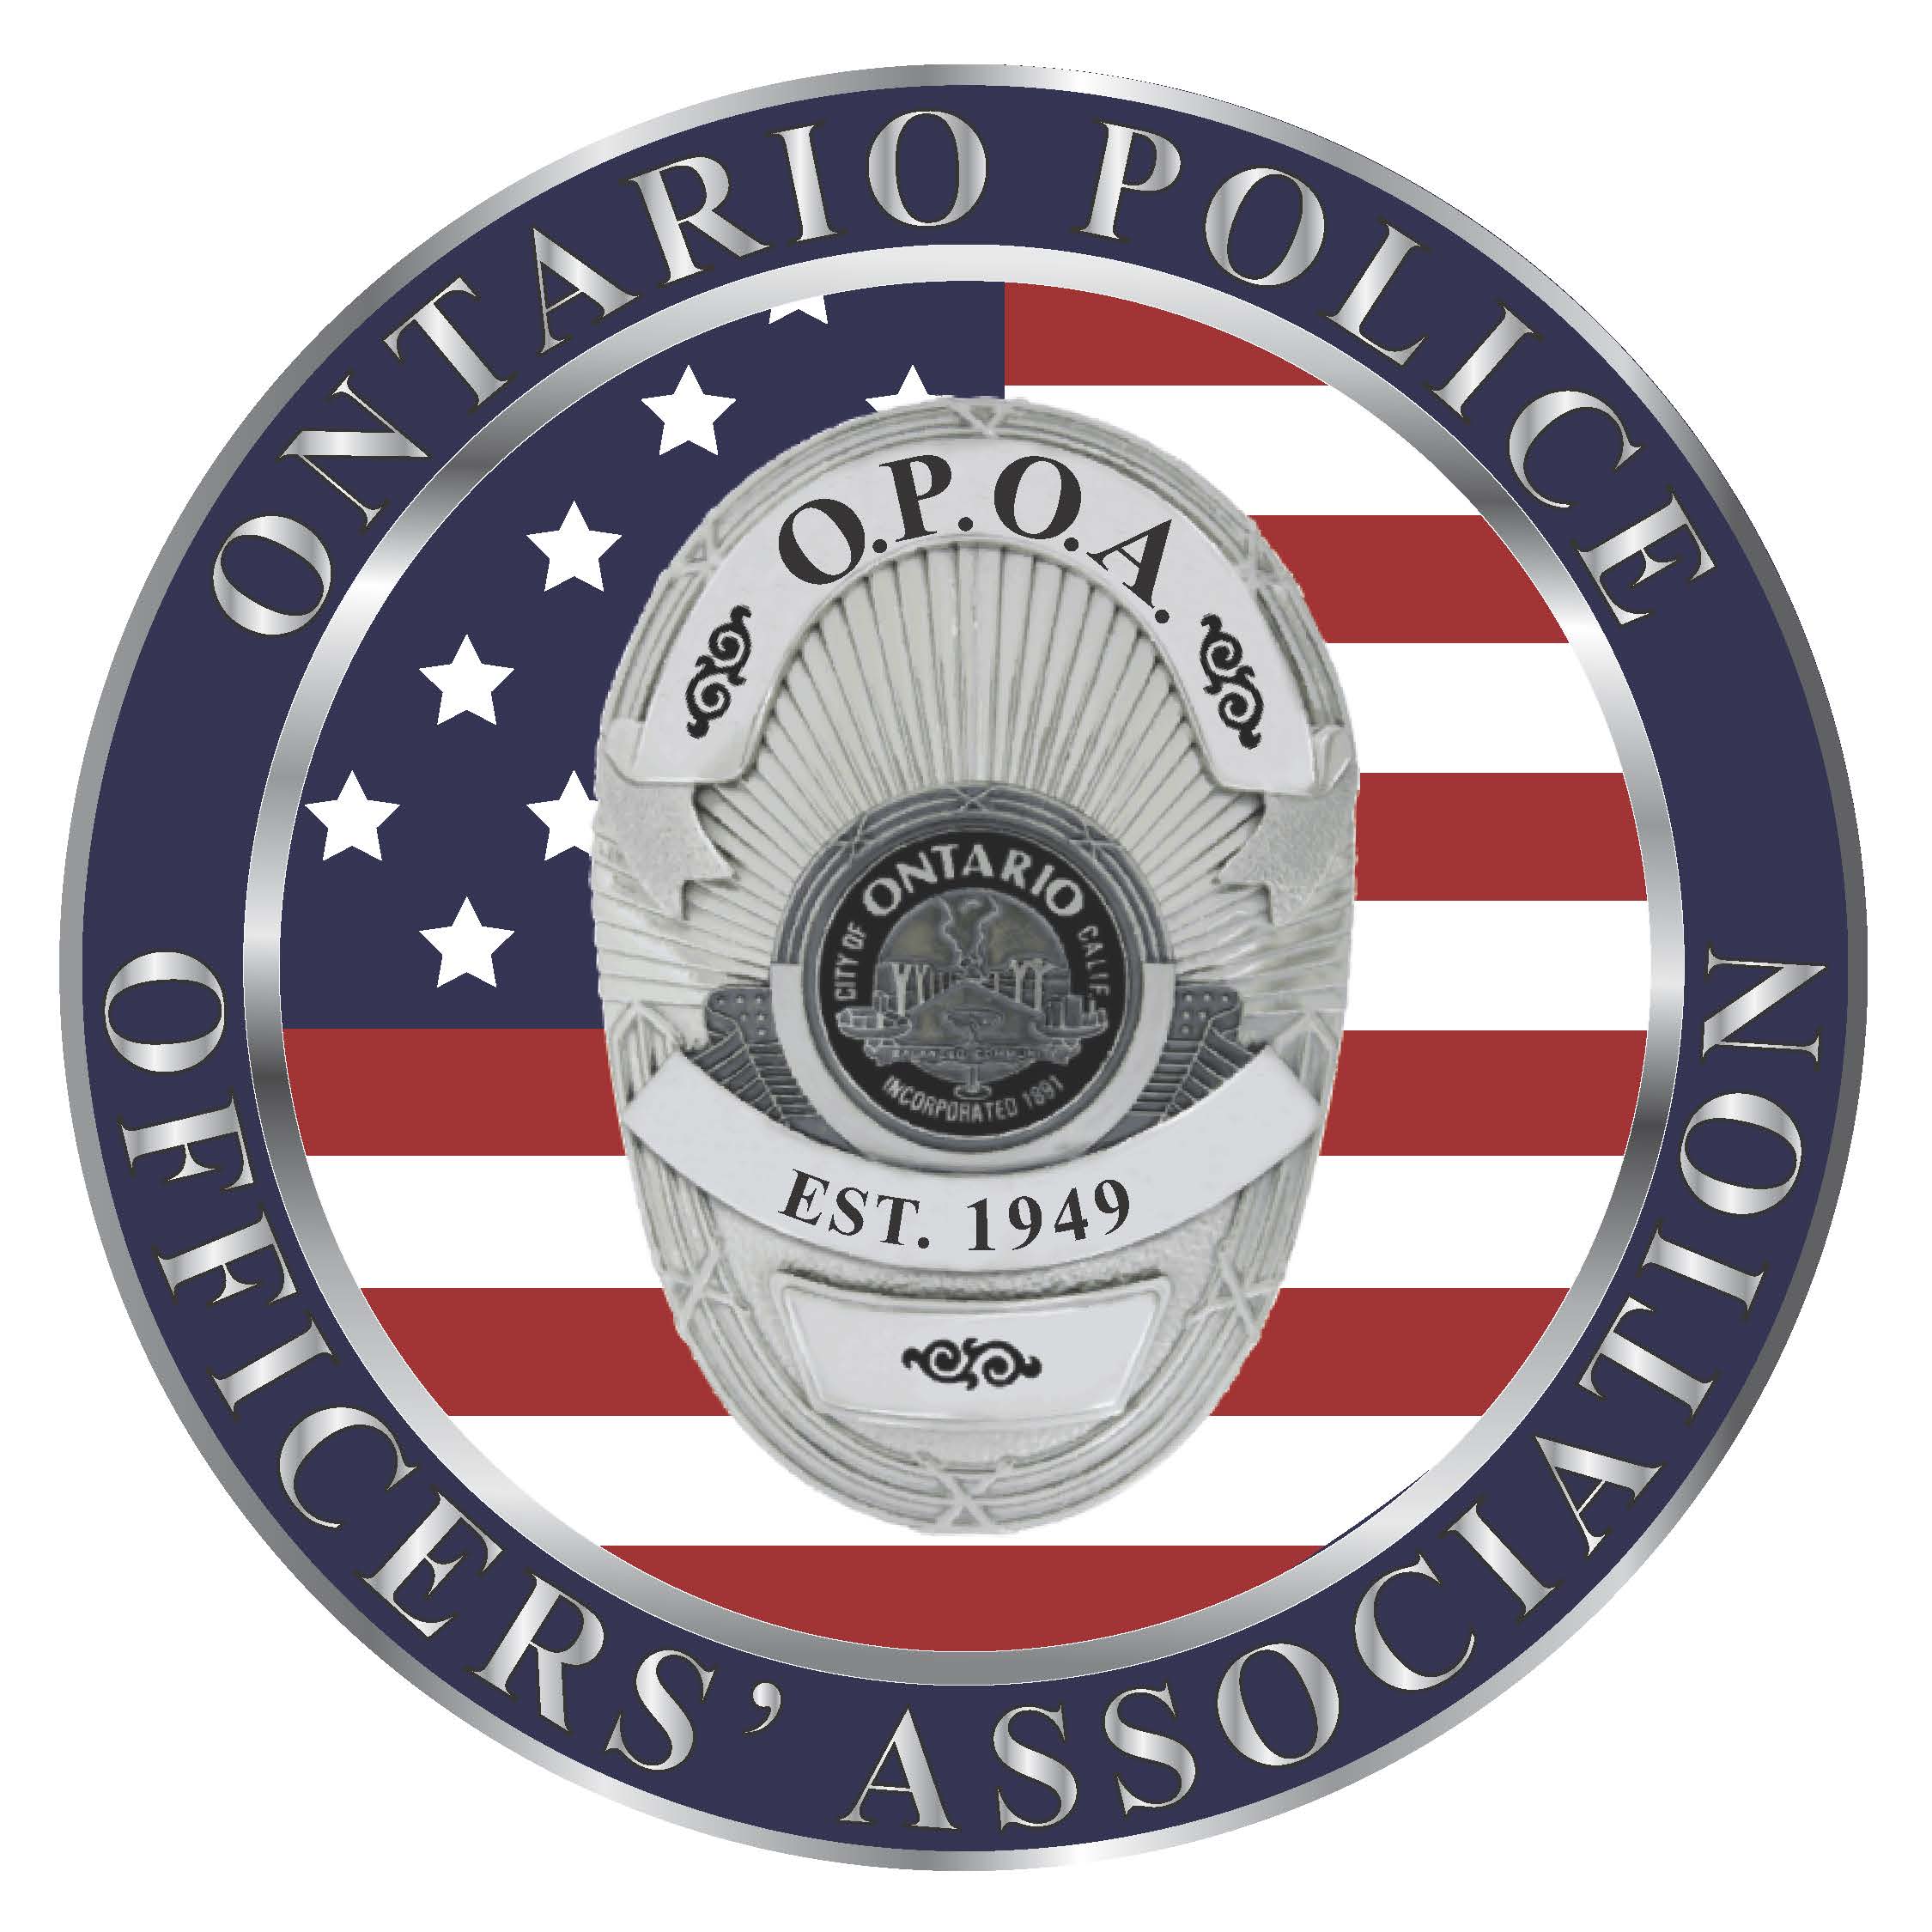 Ontario Police Officers Association